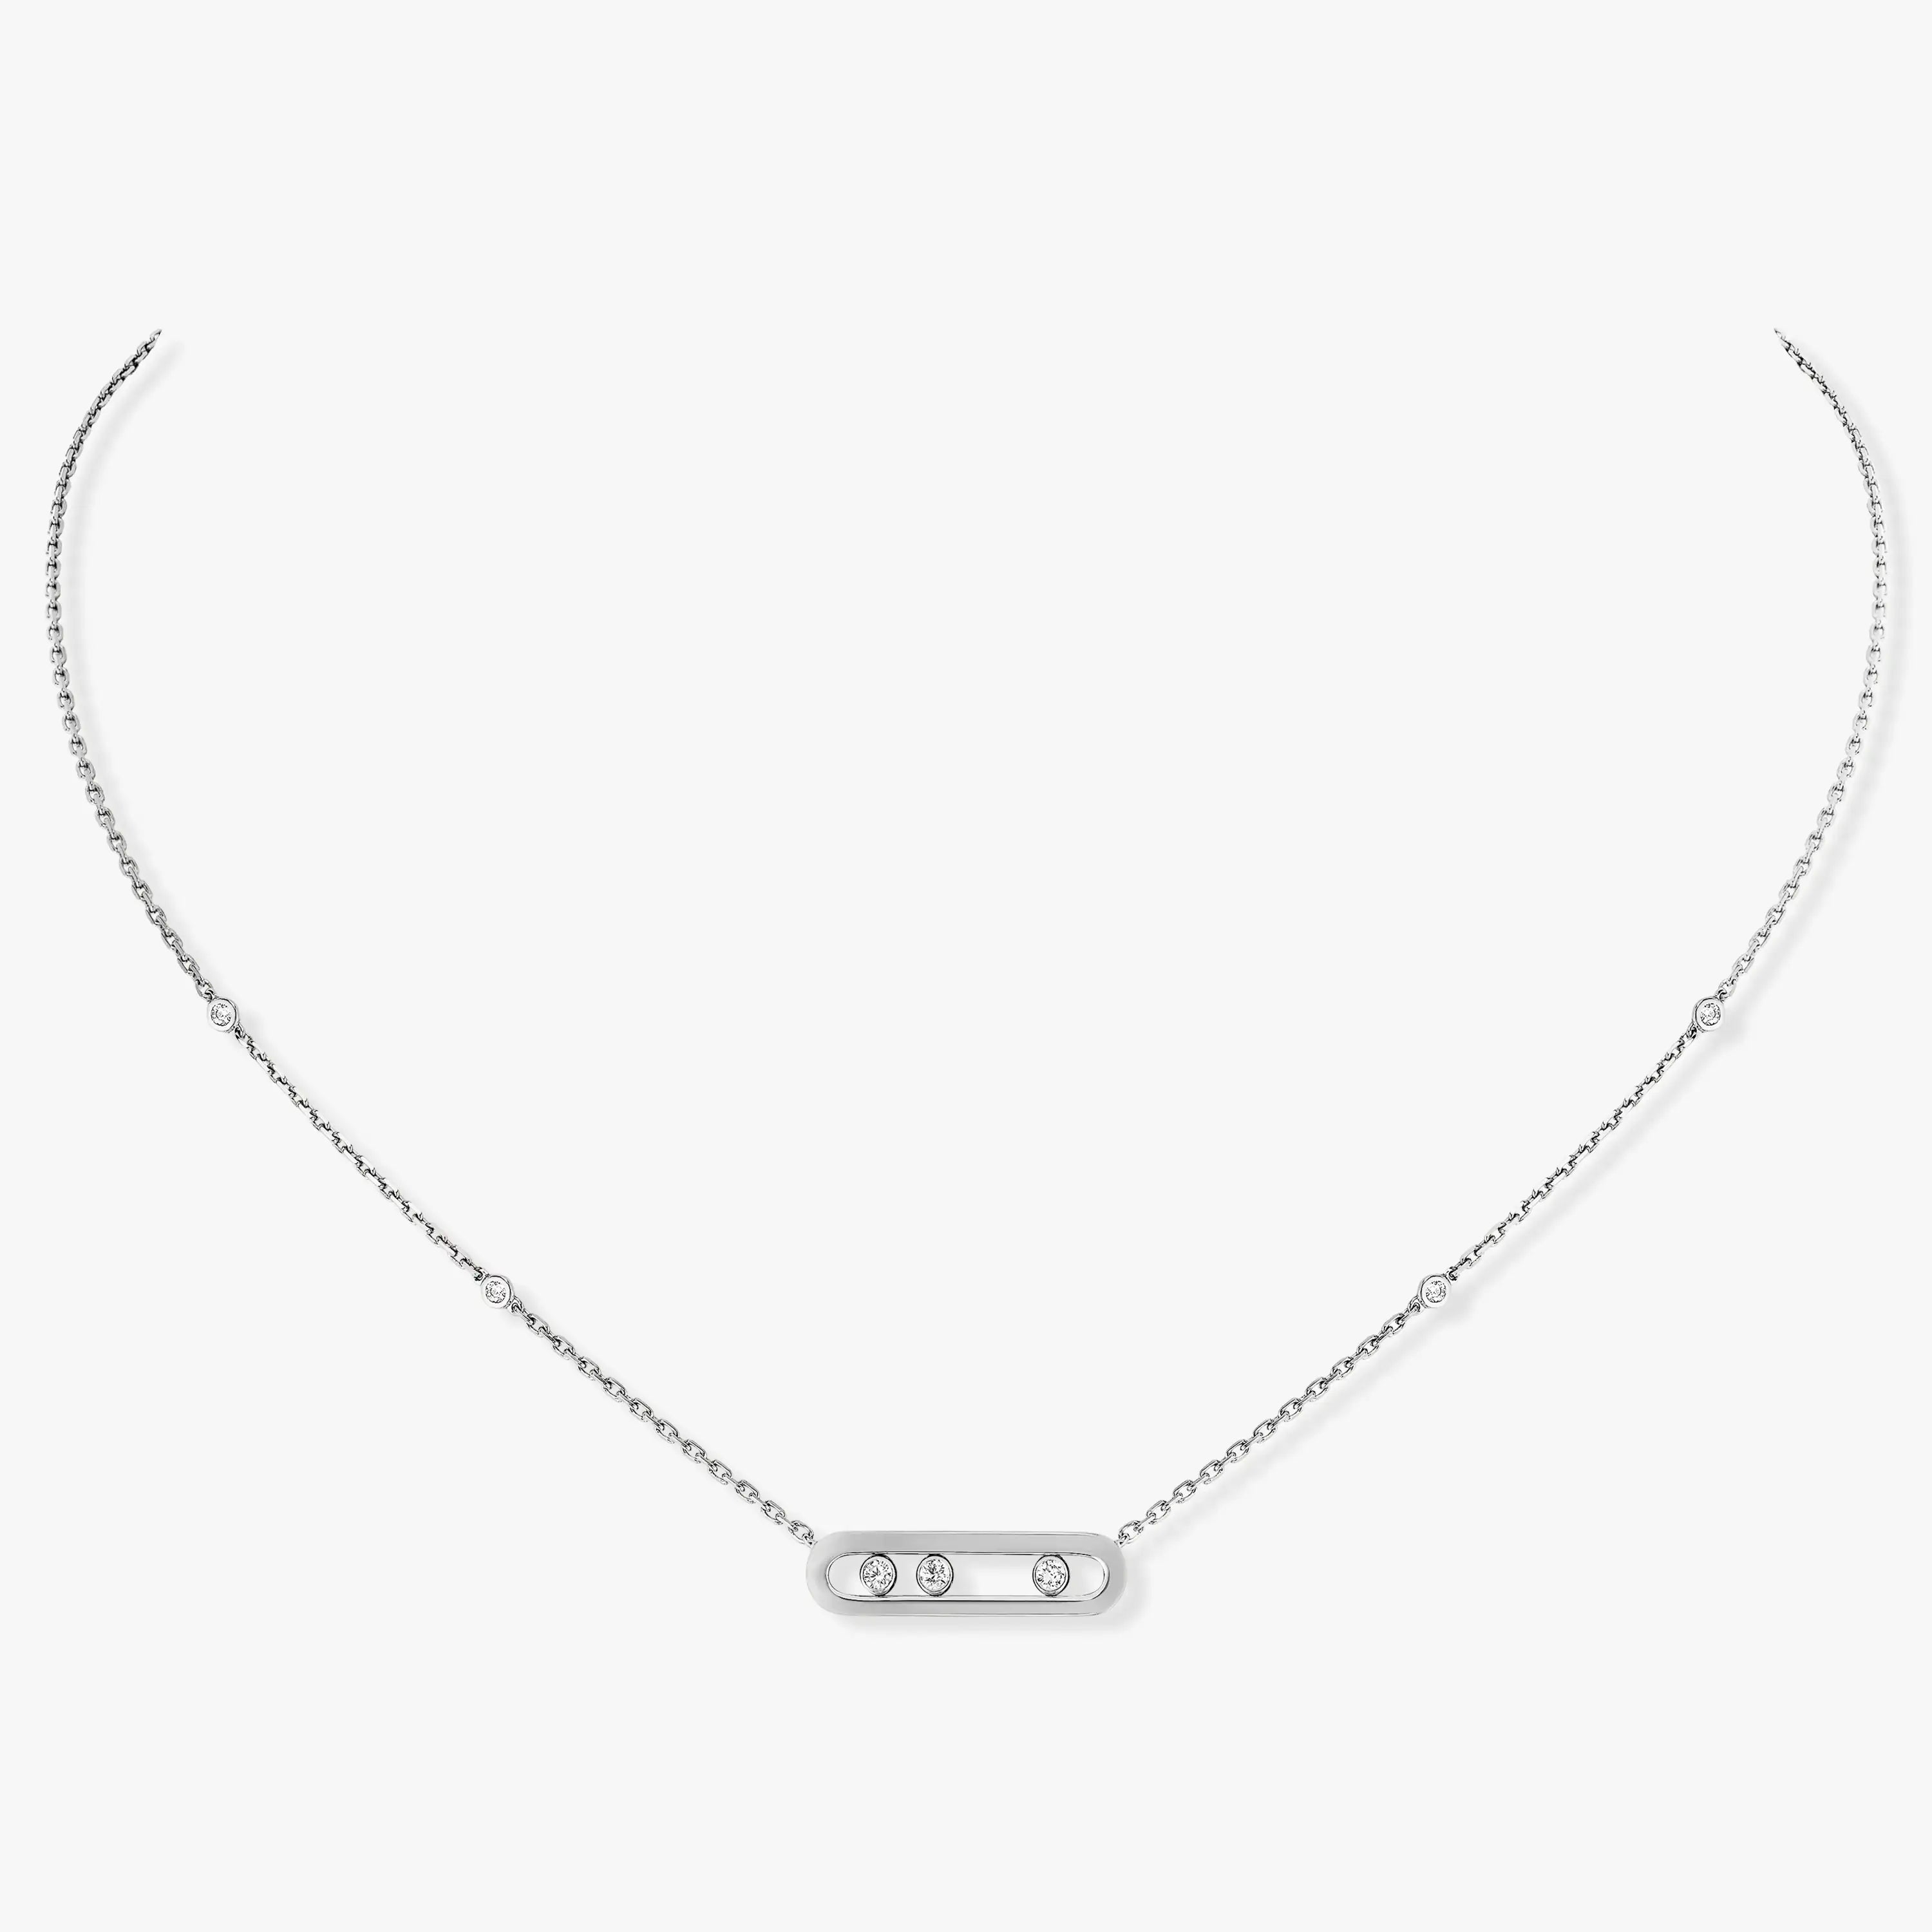 MESSIKA WHITE GOLD DIAMOND NECKLACE BABY MOVE 04323-WG